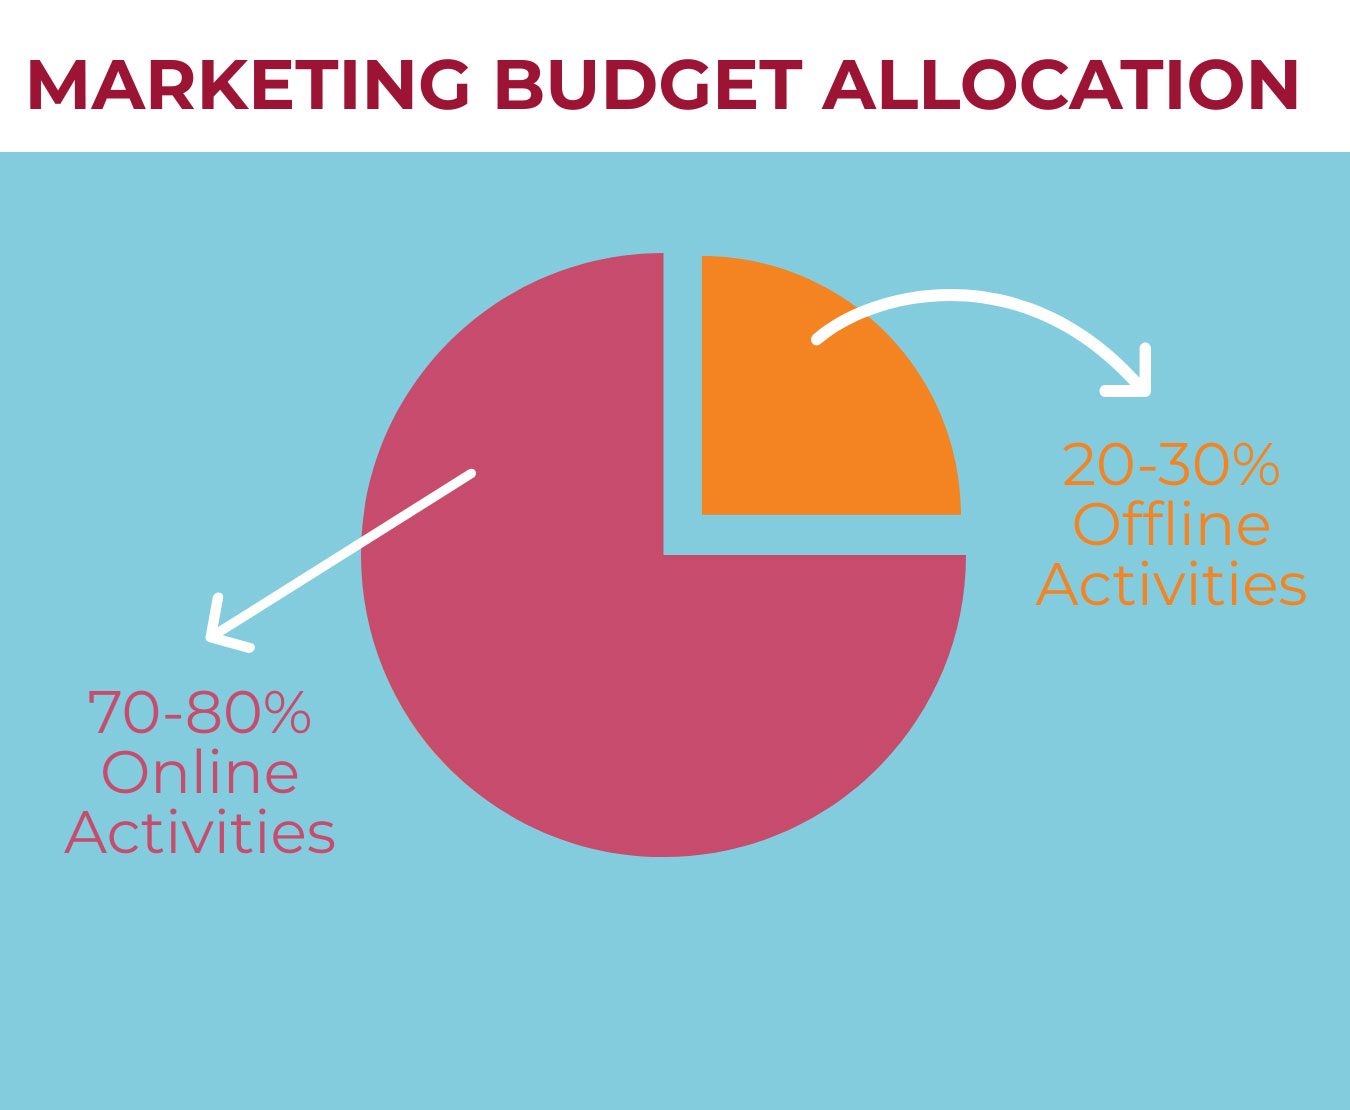 Marketing Budgeting for Manufacturers - 70-80% online and 20-30% offline